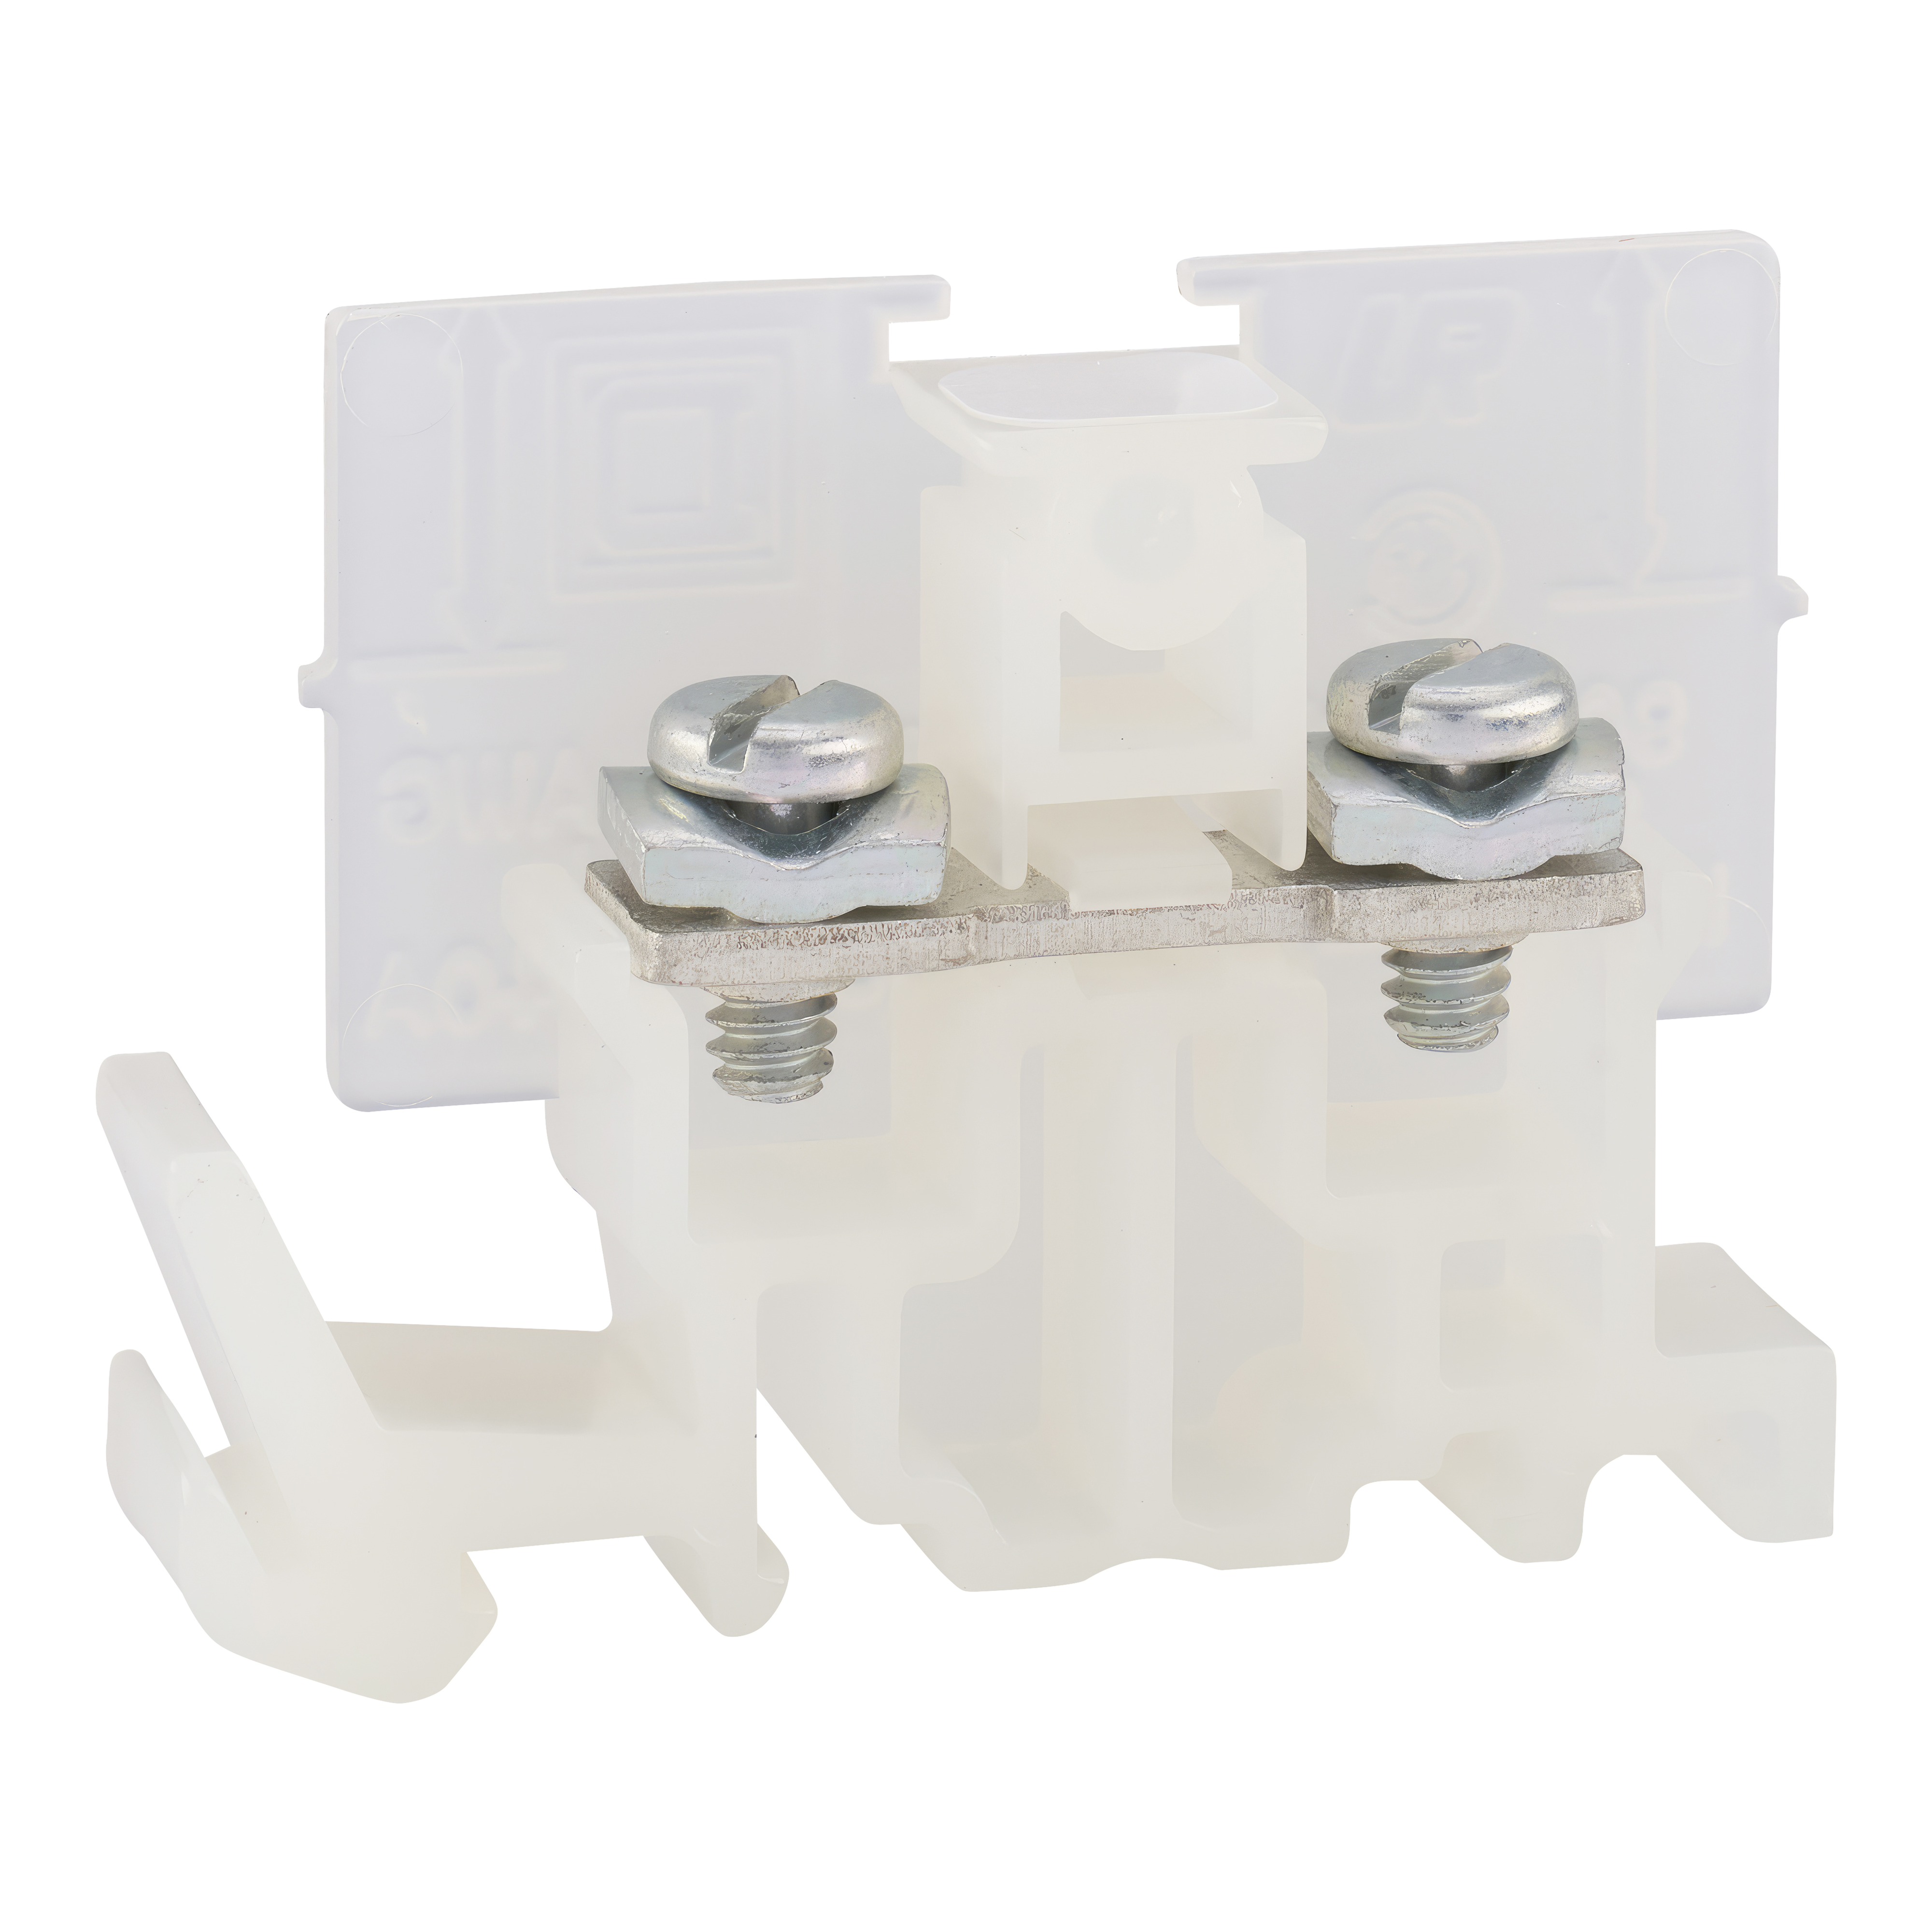 Terminal block, Linergy, pressure wire connector, natural colored block, 40A, 600V